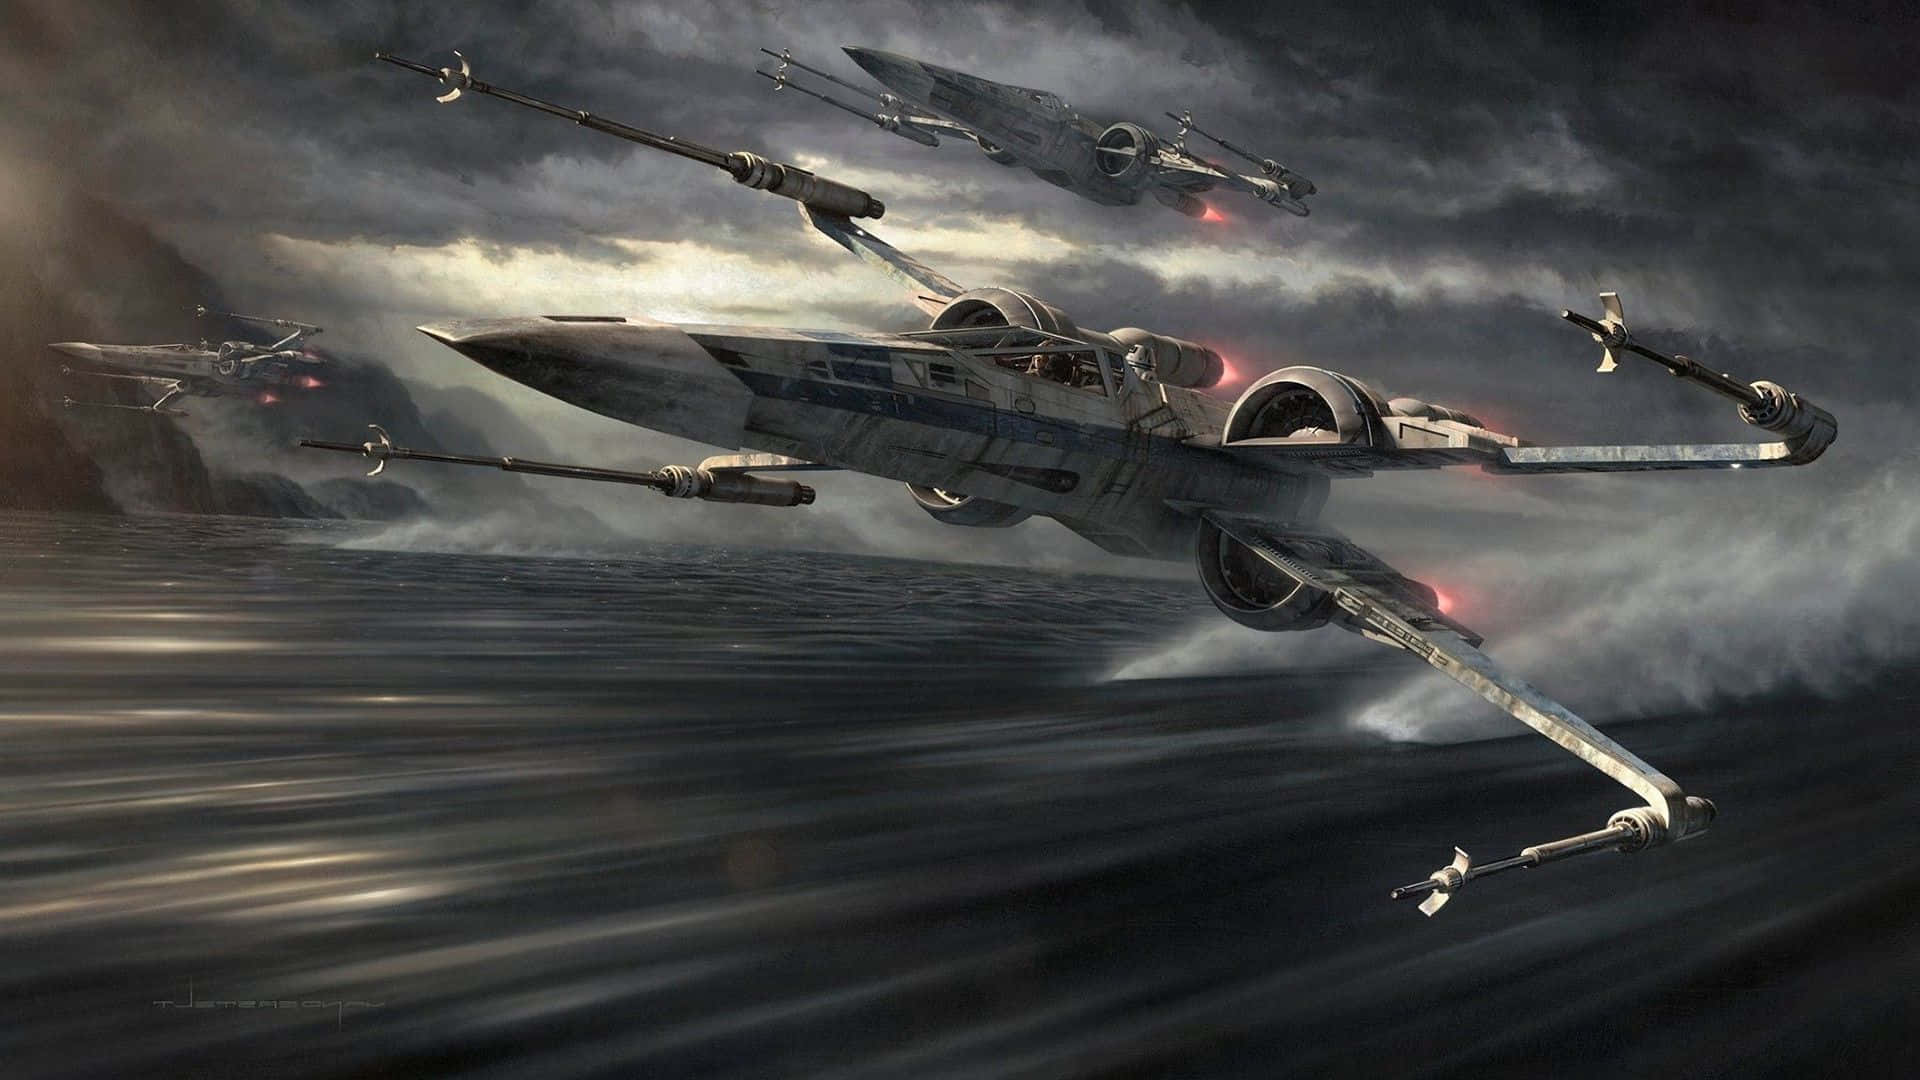 "The Resistance takes on the First Order in epic sky battles" Wallpaper